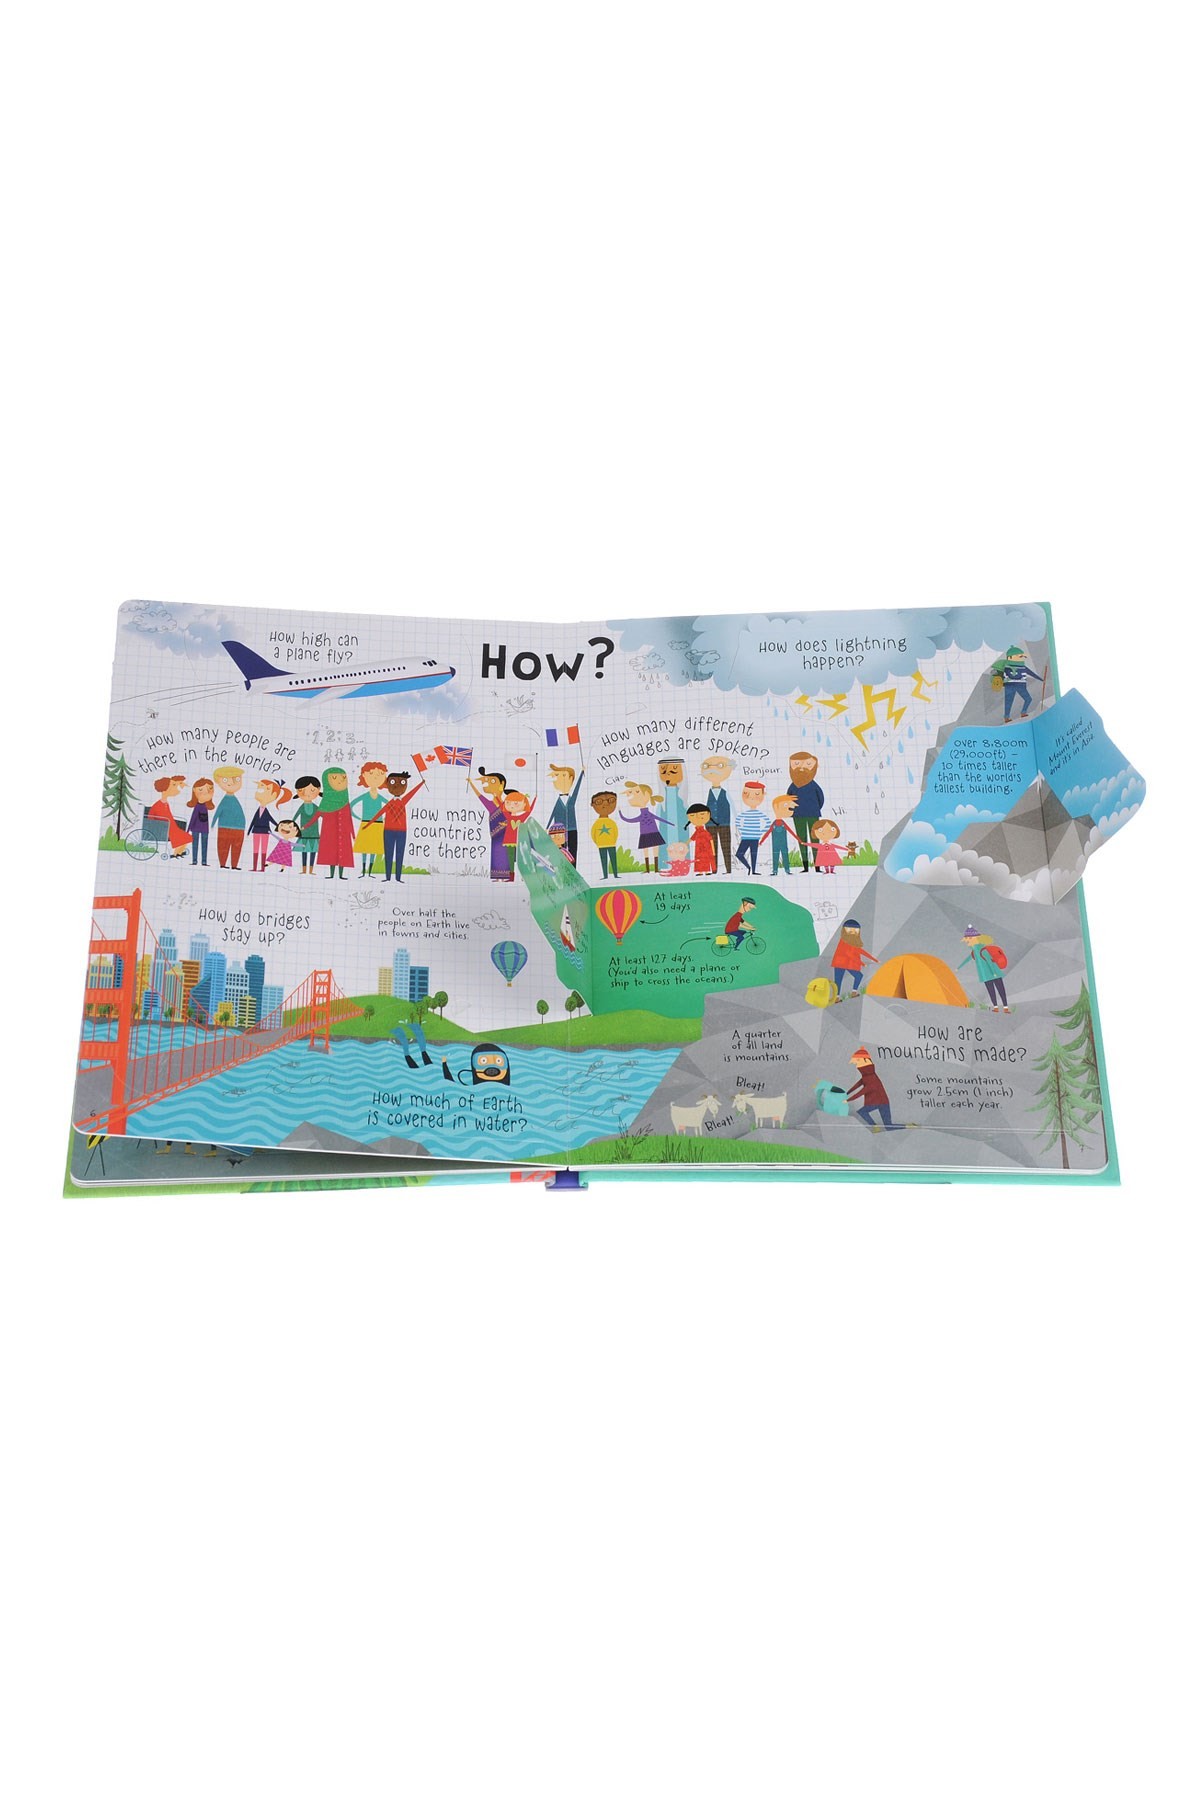 The Usborne Lift The Flap Questions and Answers about Our World